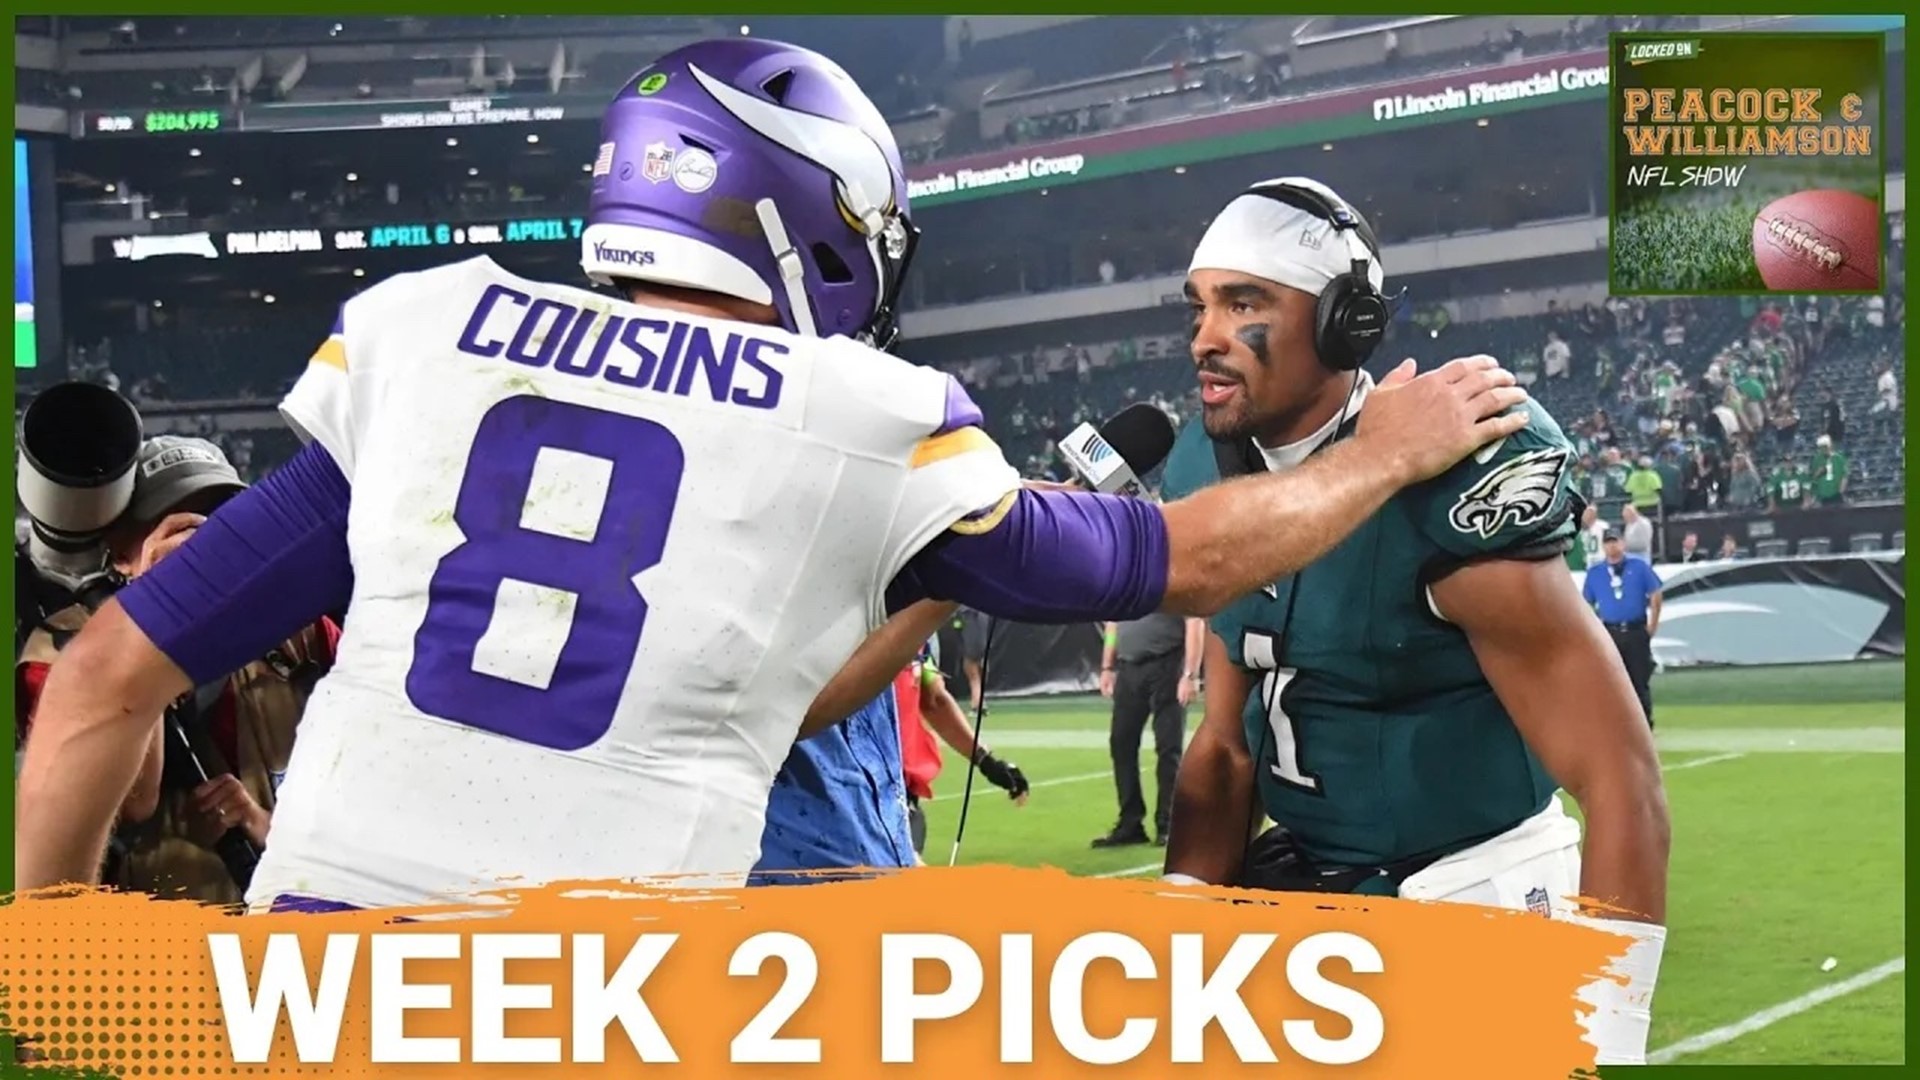 Week 2 NFL picks! Is the Minnesota Vikings 2023 season already over after two losses and a tough schedule ahead?